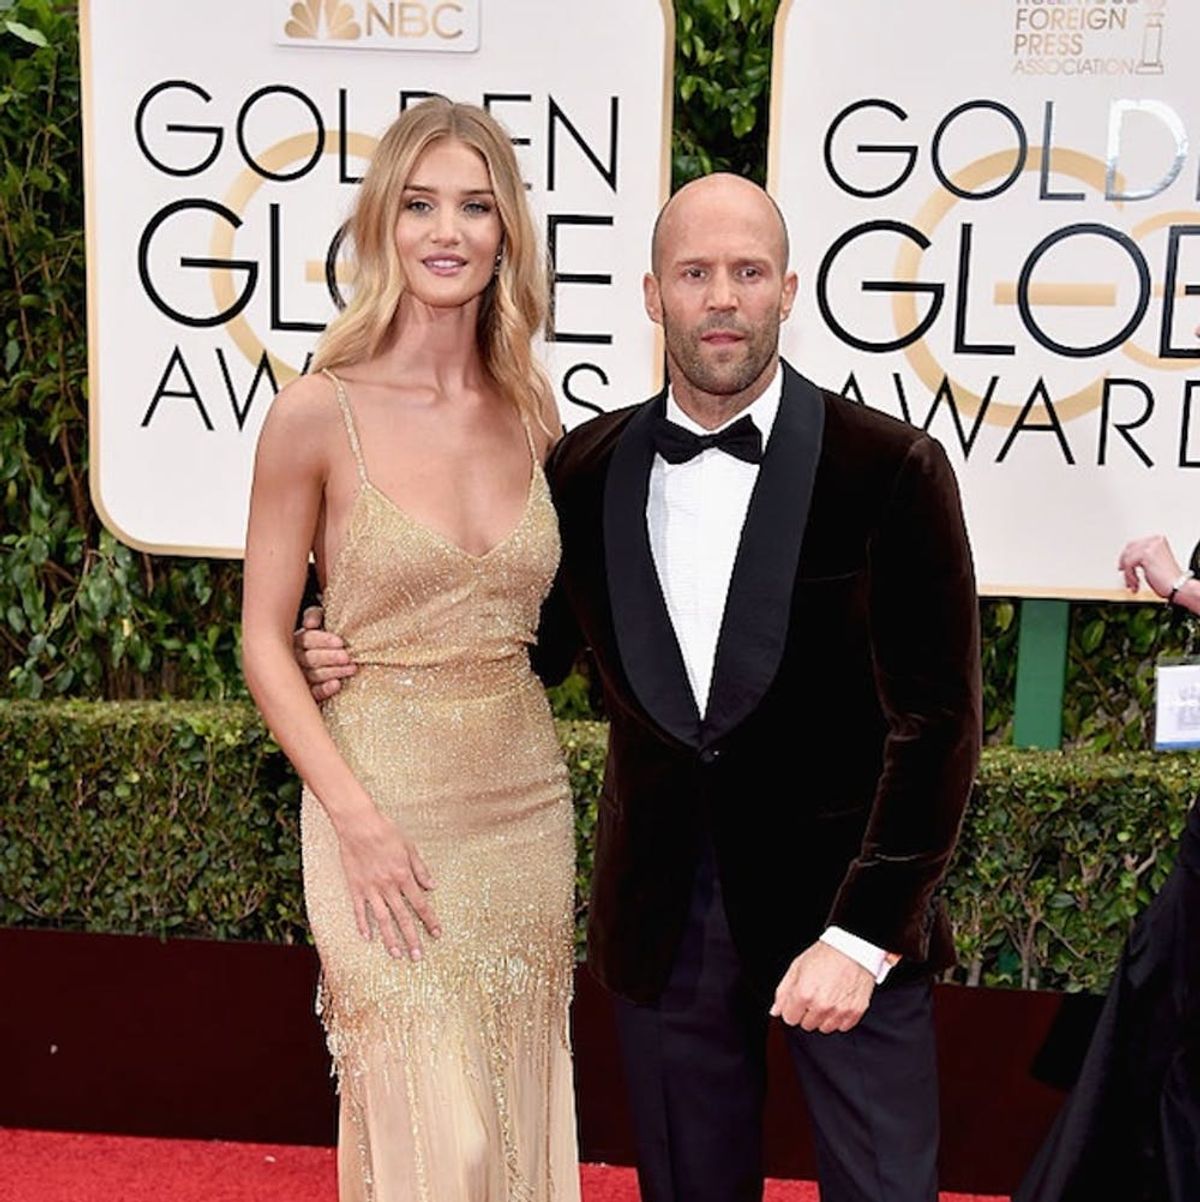 Rosie Huntington-Whitely’s Engagement Ring Was the Golden Globes’ Most Surprising Accessory